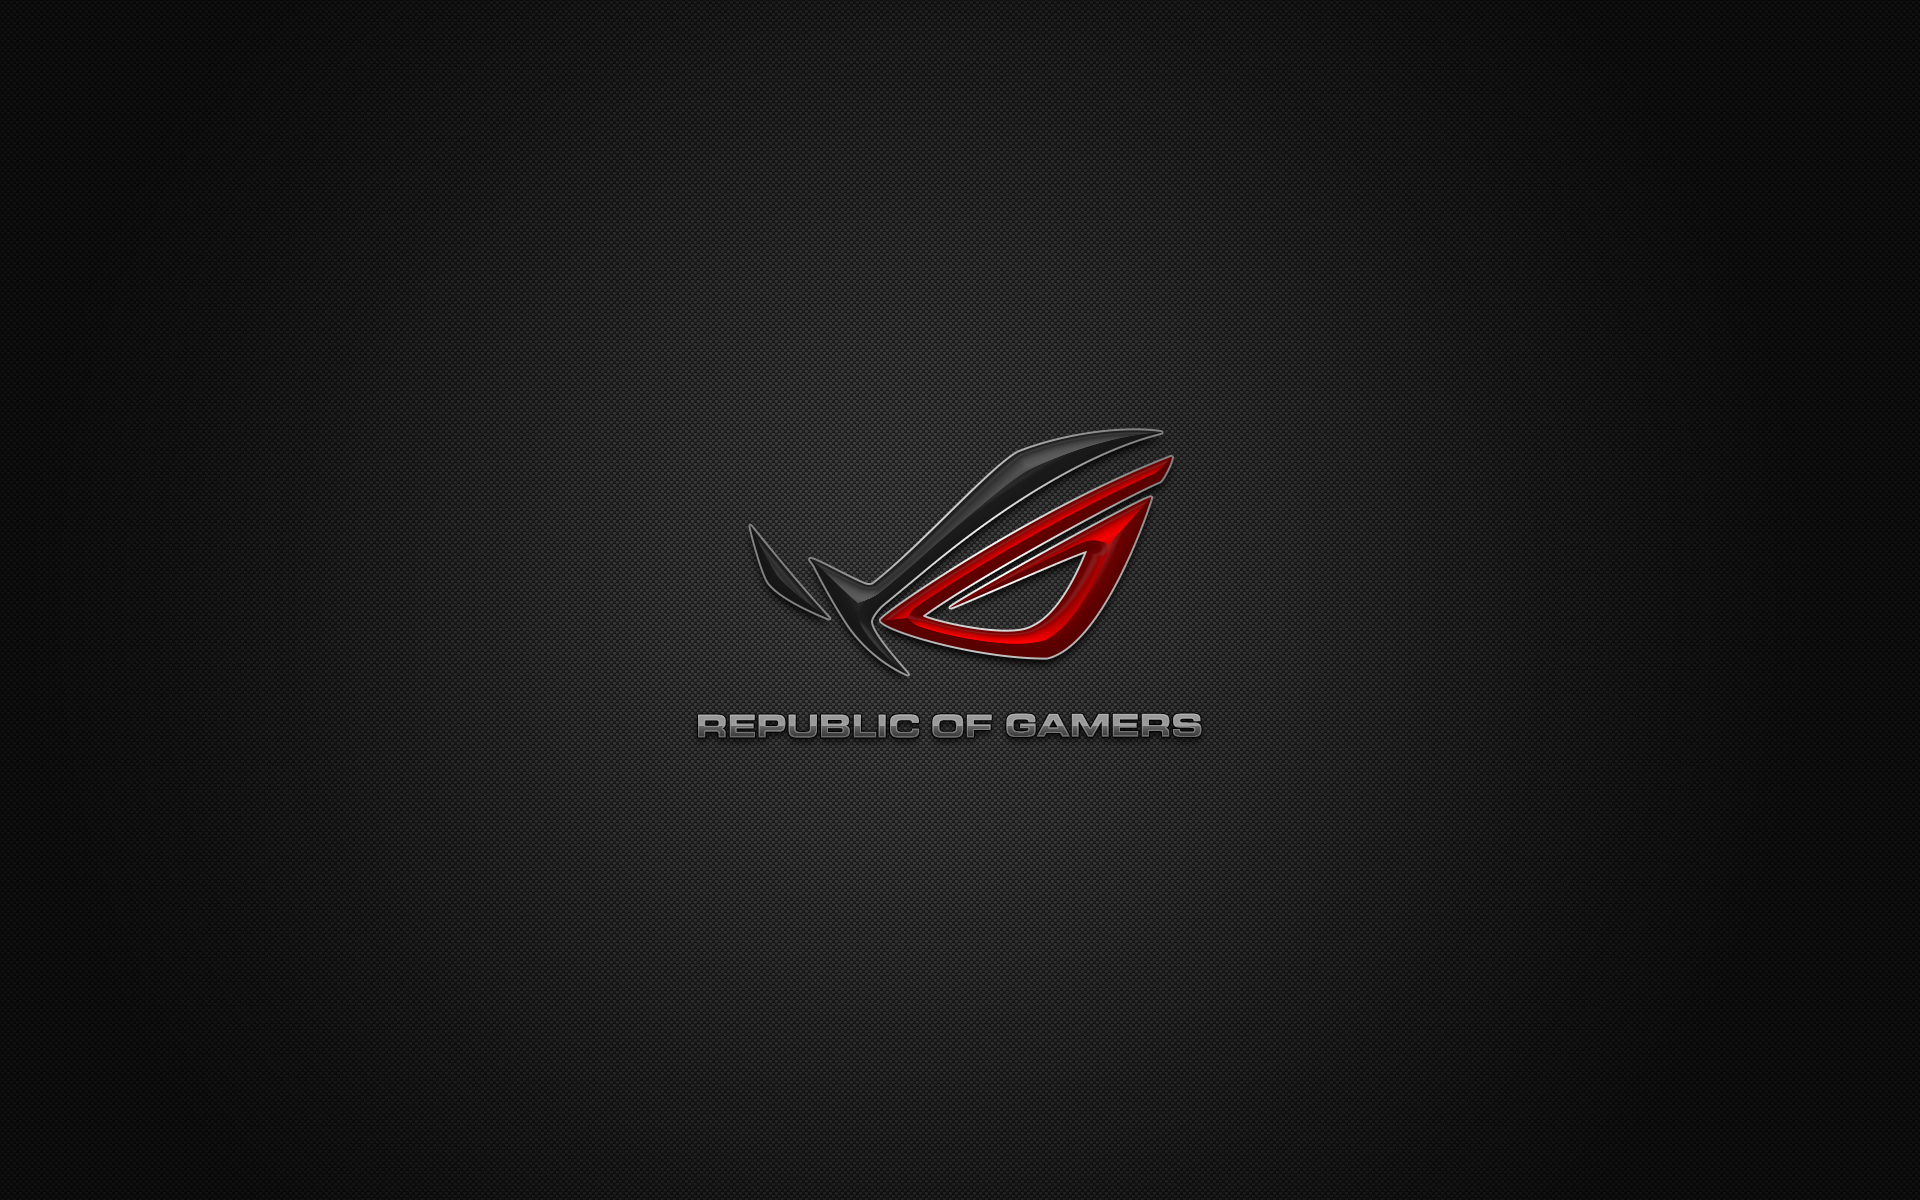 Asus Rog Wallpaper Archive Republic Of Gamers The